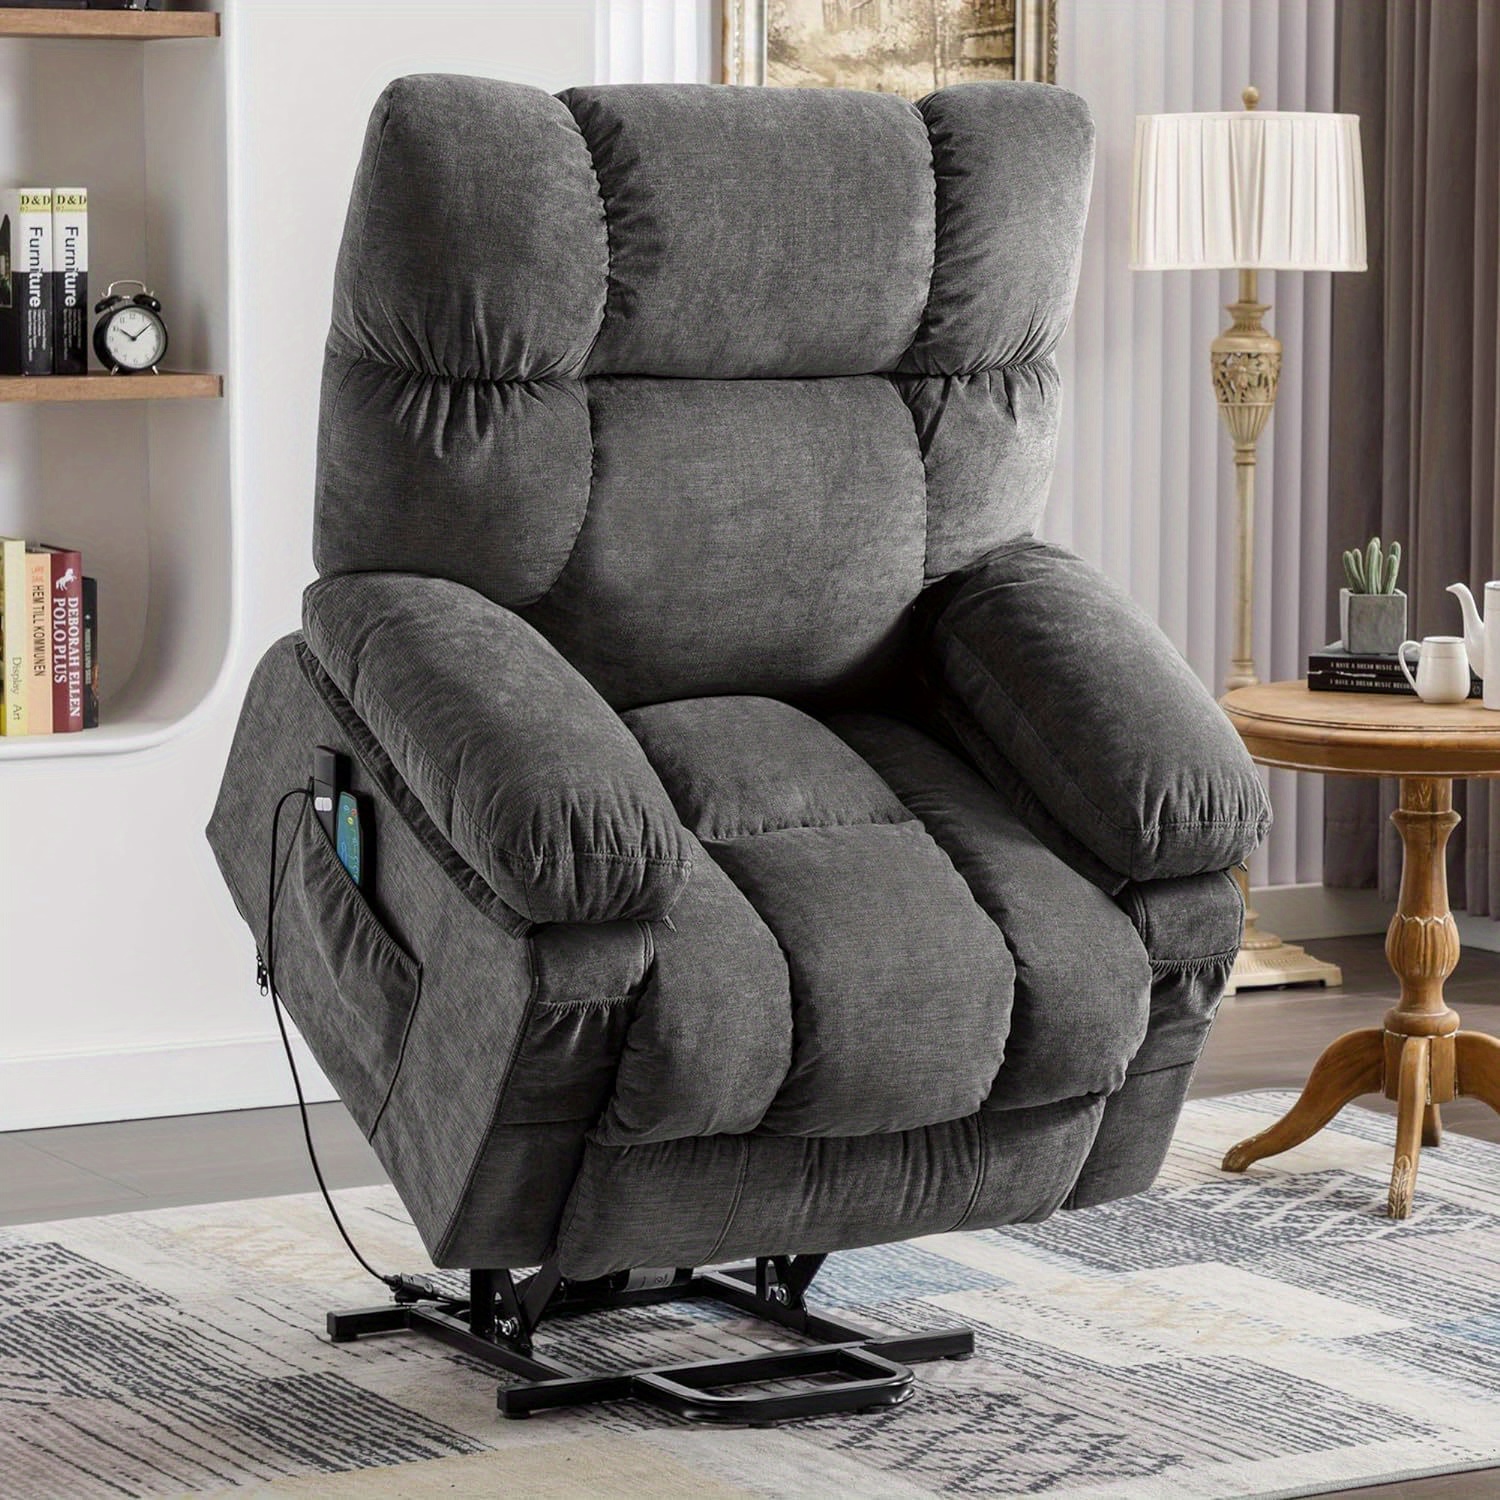 

Recliner Chairs Modern Chair With Heat And Massage Lift Chair Recliners For Elderly Recliner Sofa, Usb Port Remote Control, Adjustable Furniture